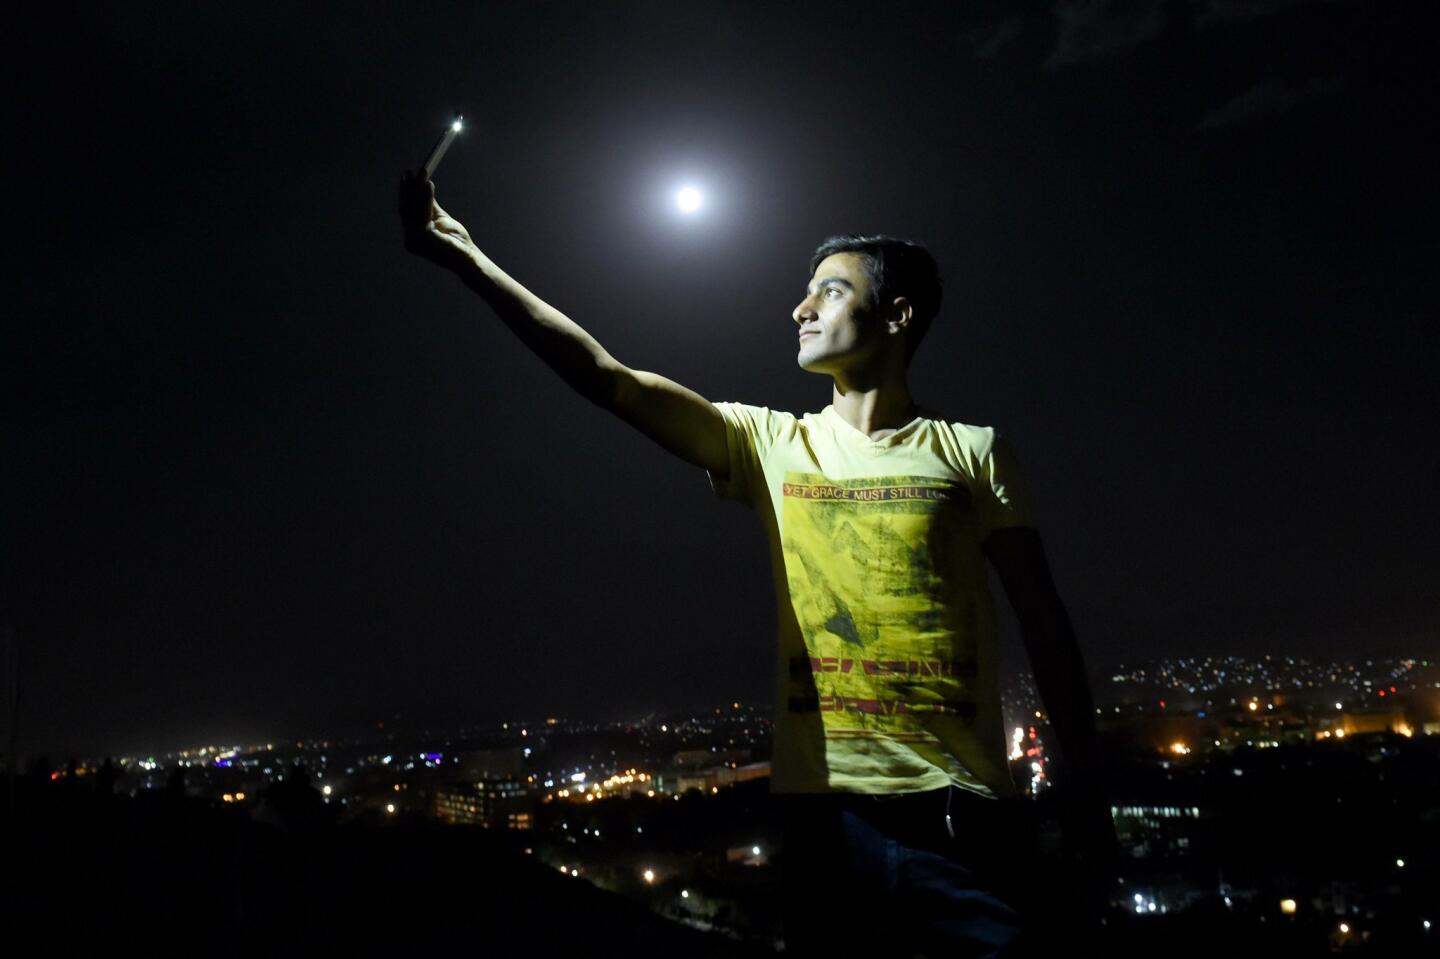 An Afghan man is illuminated by the light from his phone while taking a selfie on the top of the Wazir Akbar Khan hill in Kabul.